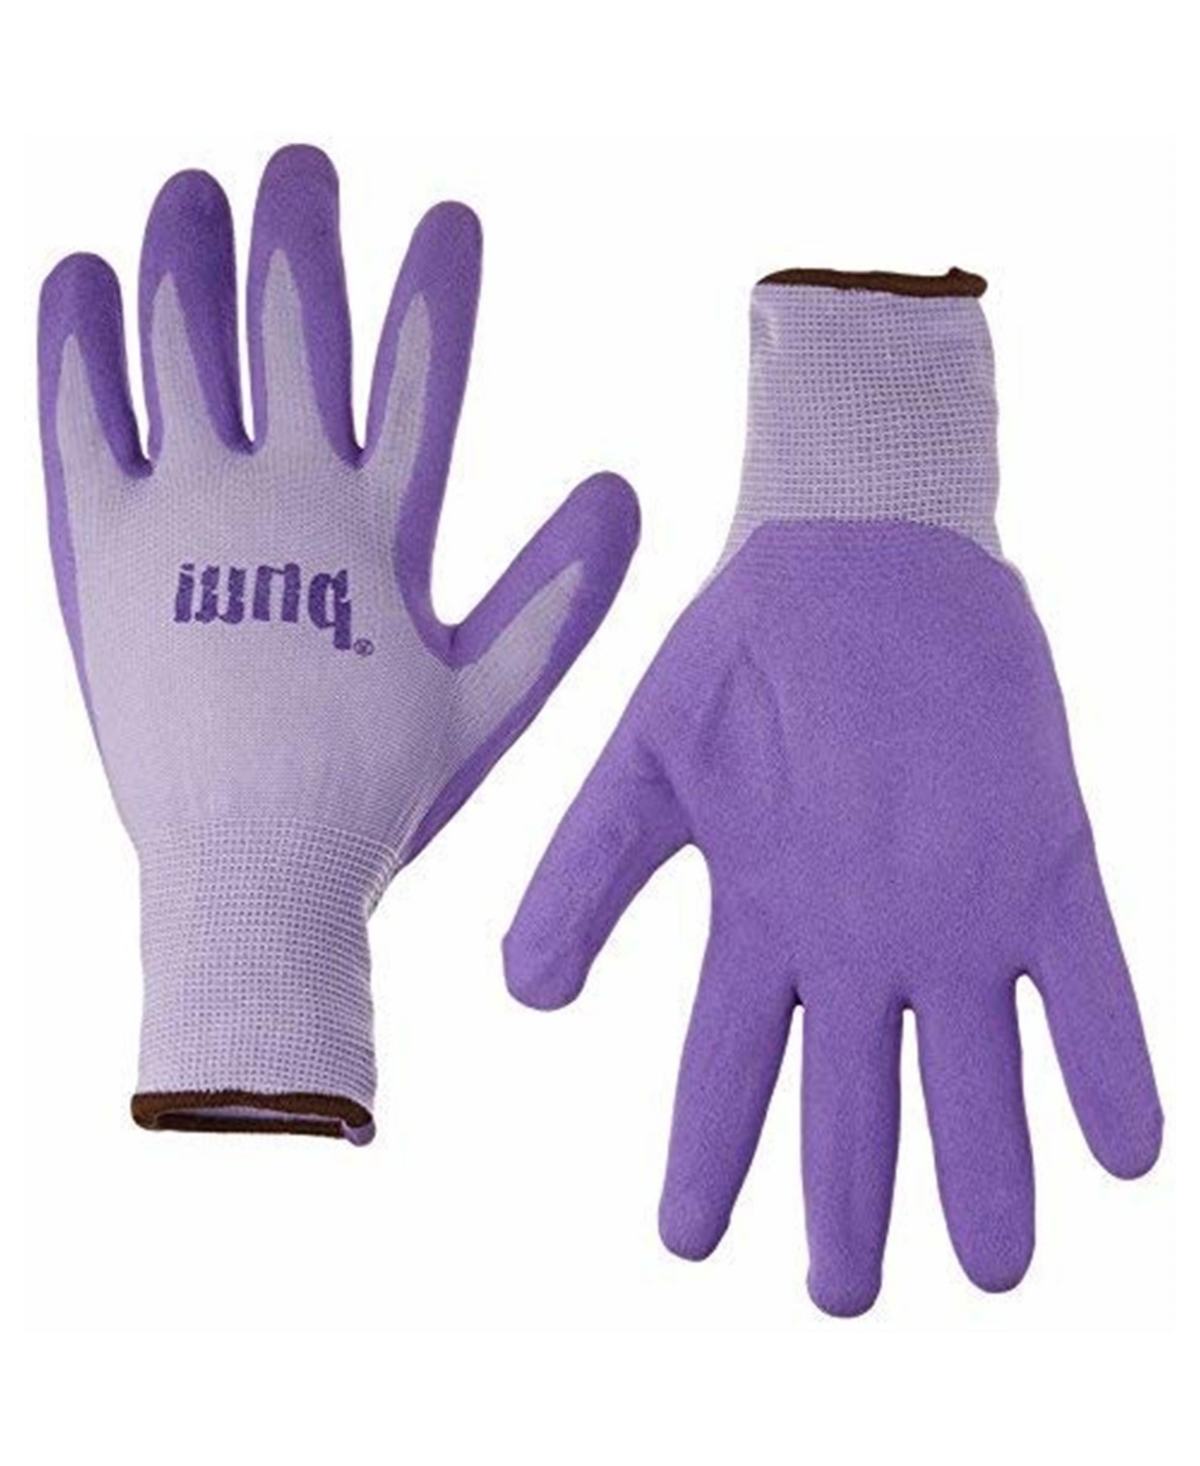 Mud Simply Mud Gloves, Nitrile Coated Gloves For Gardening and Work, Purple, Small - Purple